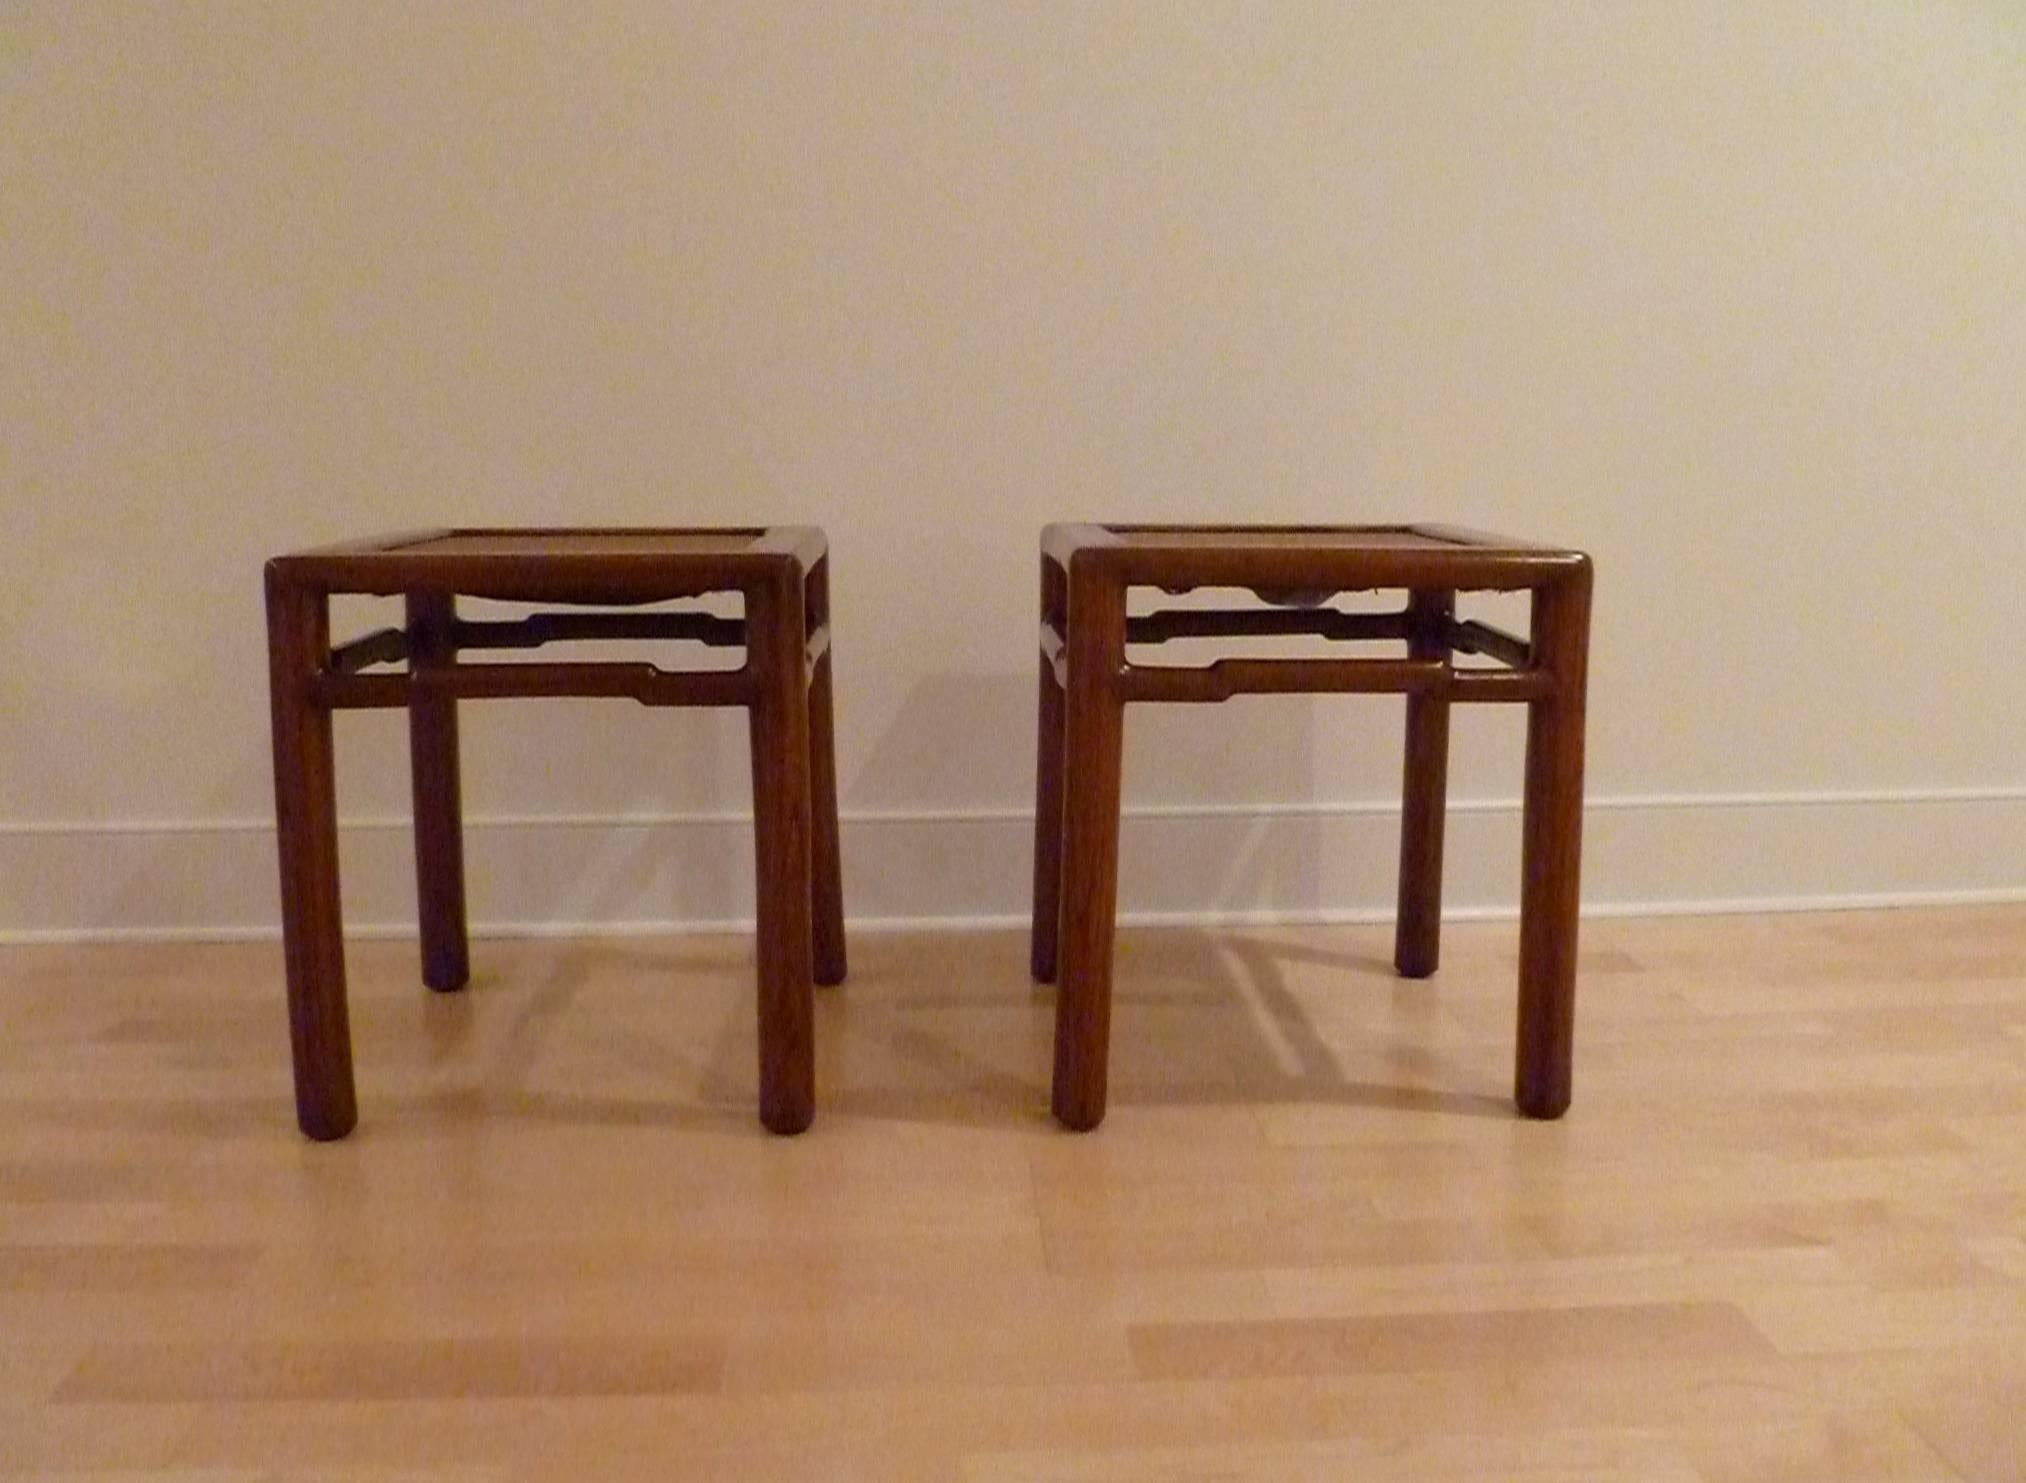 Pair of fine Jumu wood end tables with canned top. Elegant and simple form.